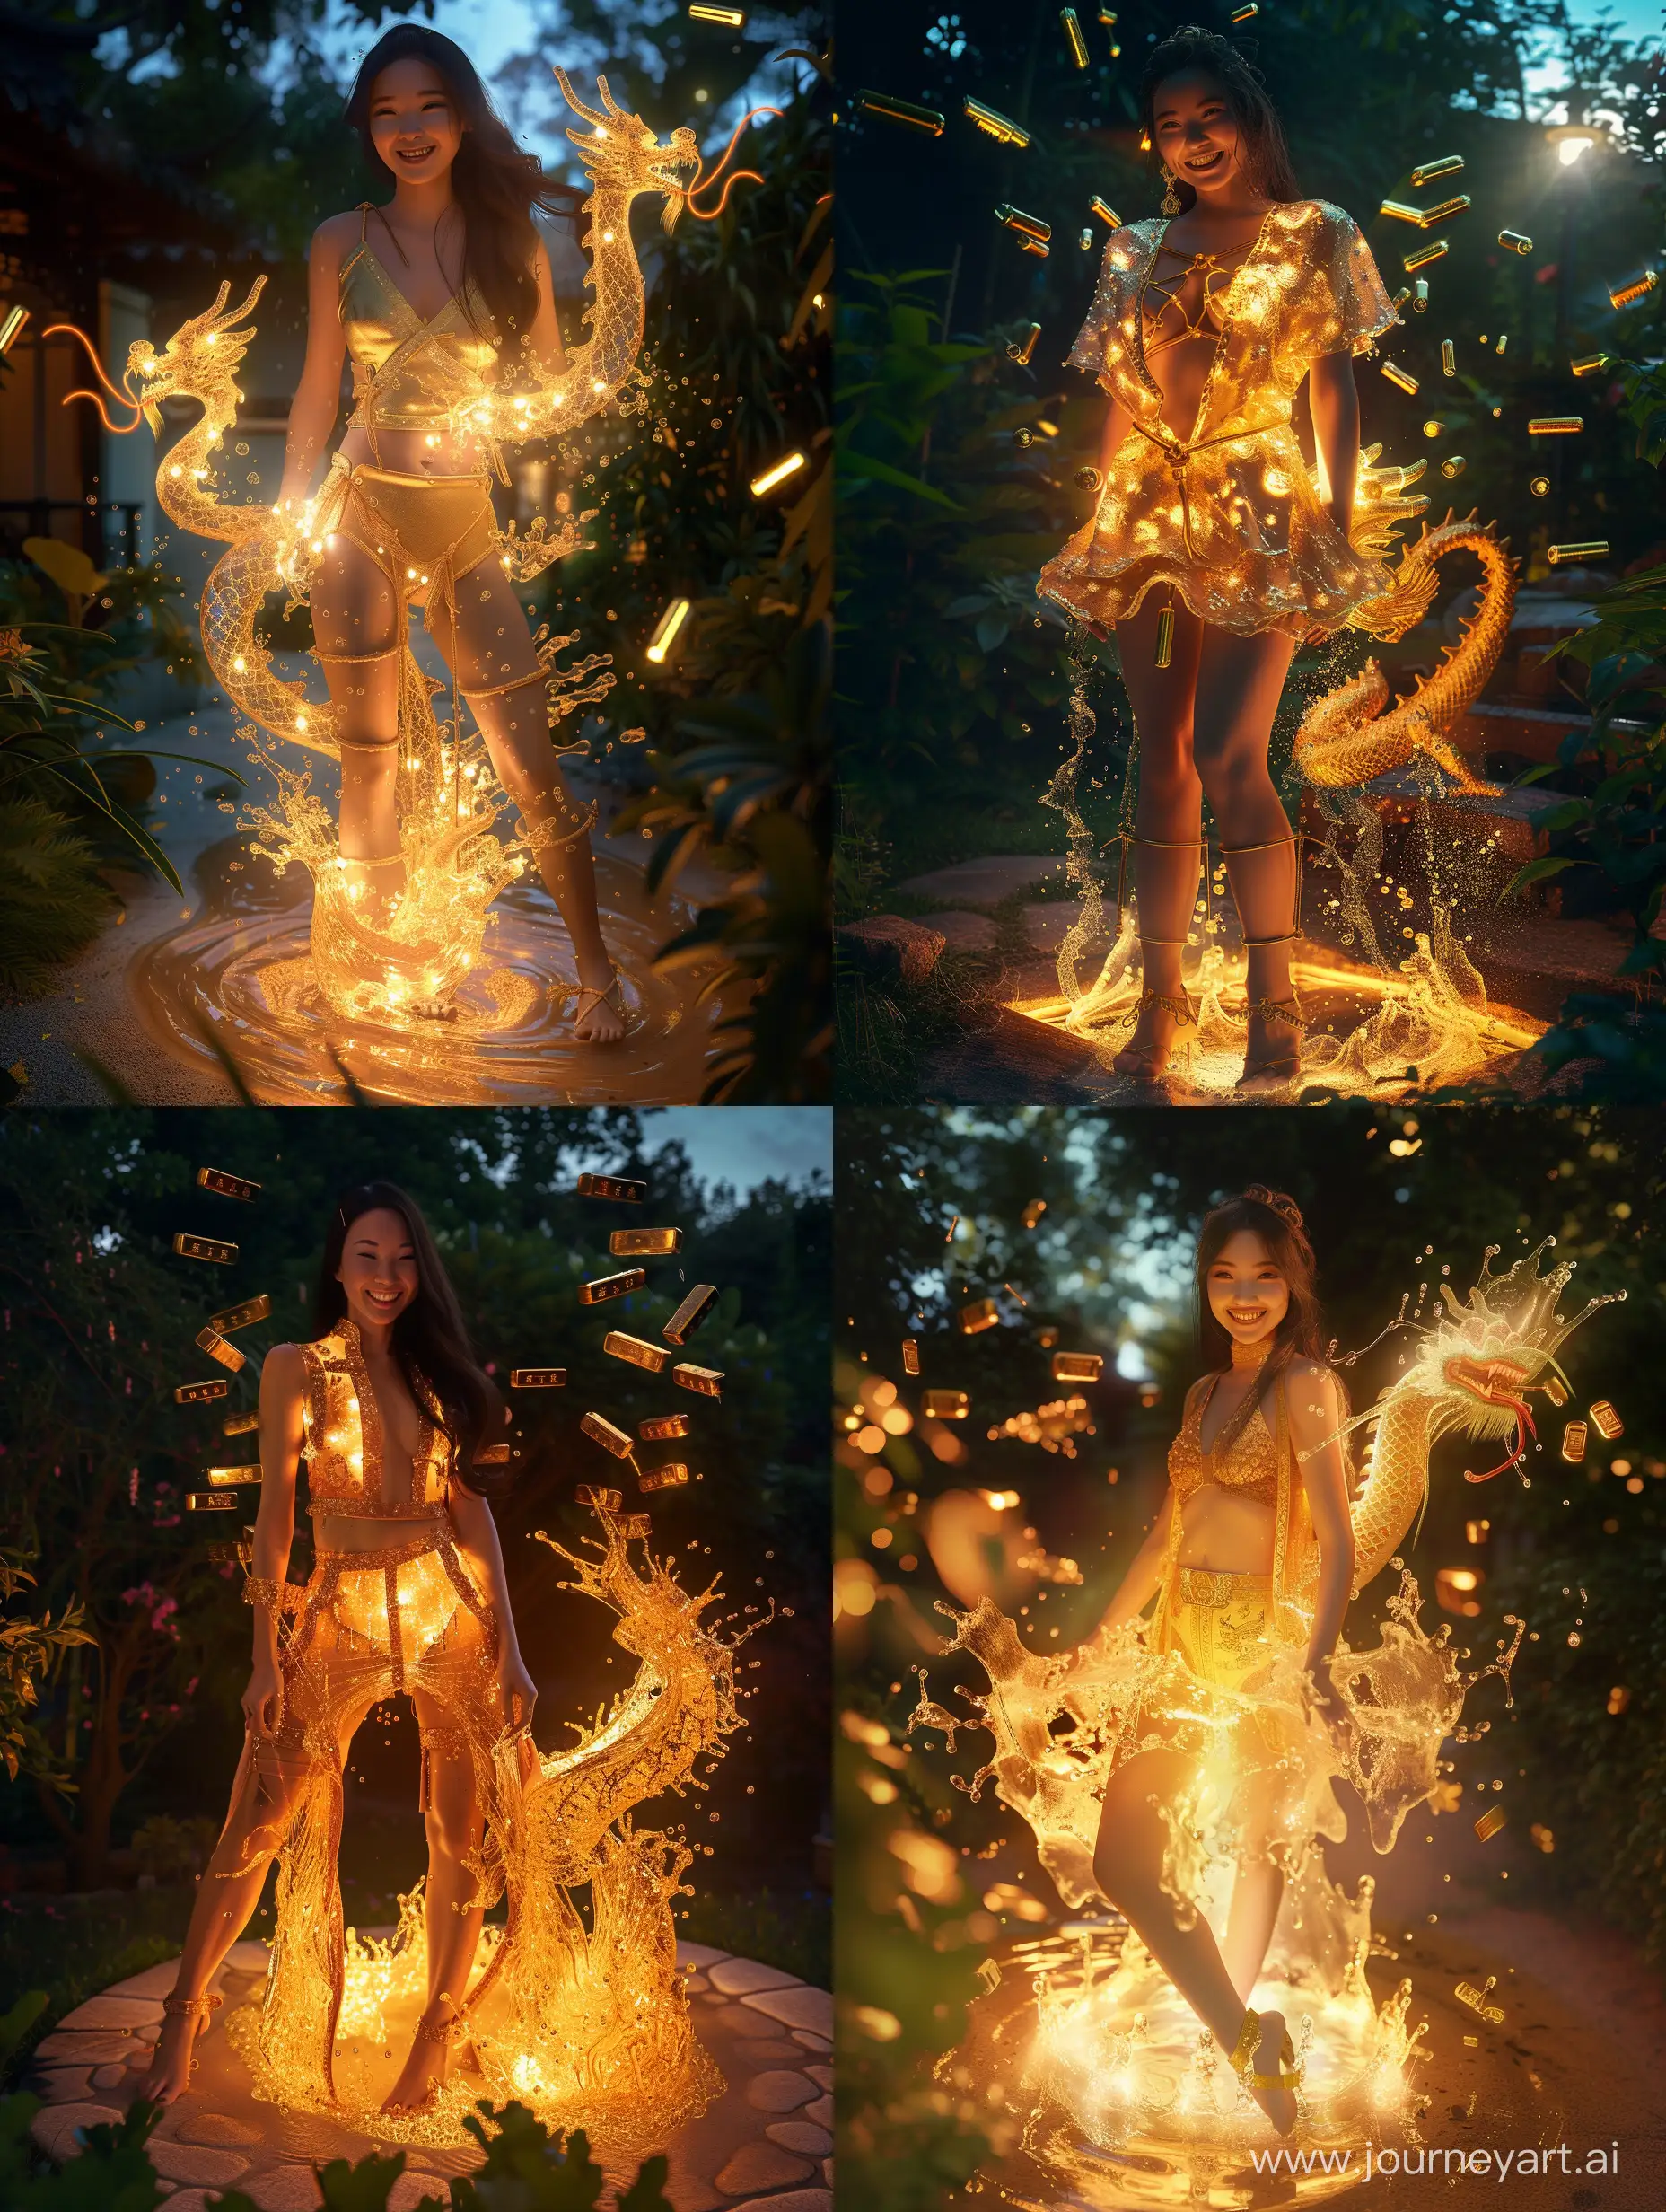 Glowing-Golden-Chinese-Dragon-Emerges-from-Womans-Transformed-Attire-in-Night-Garden